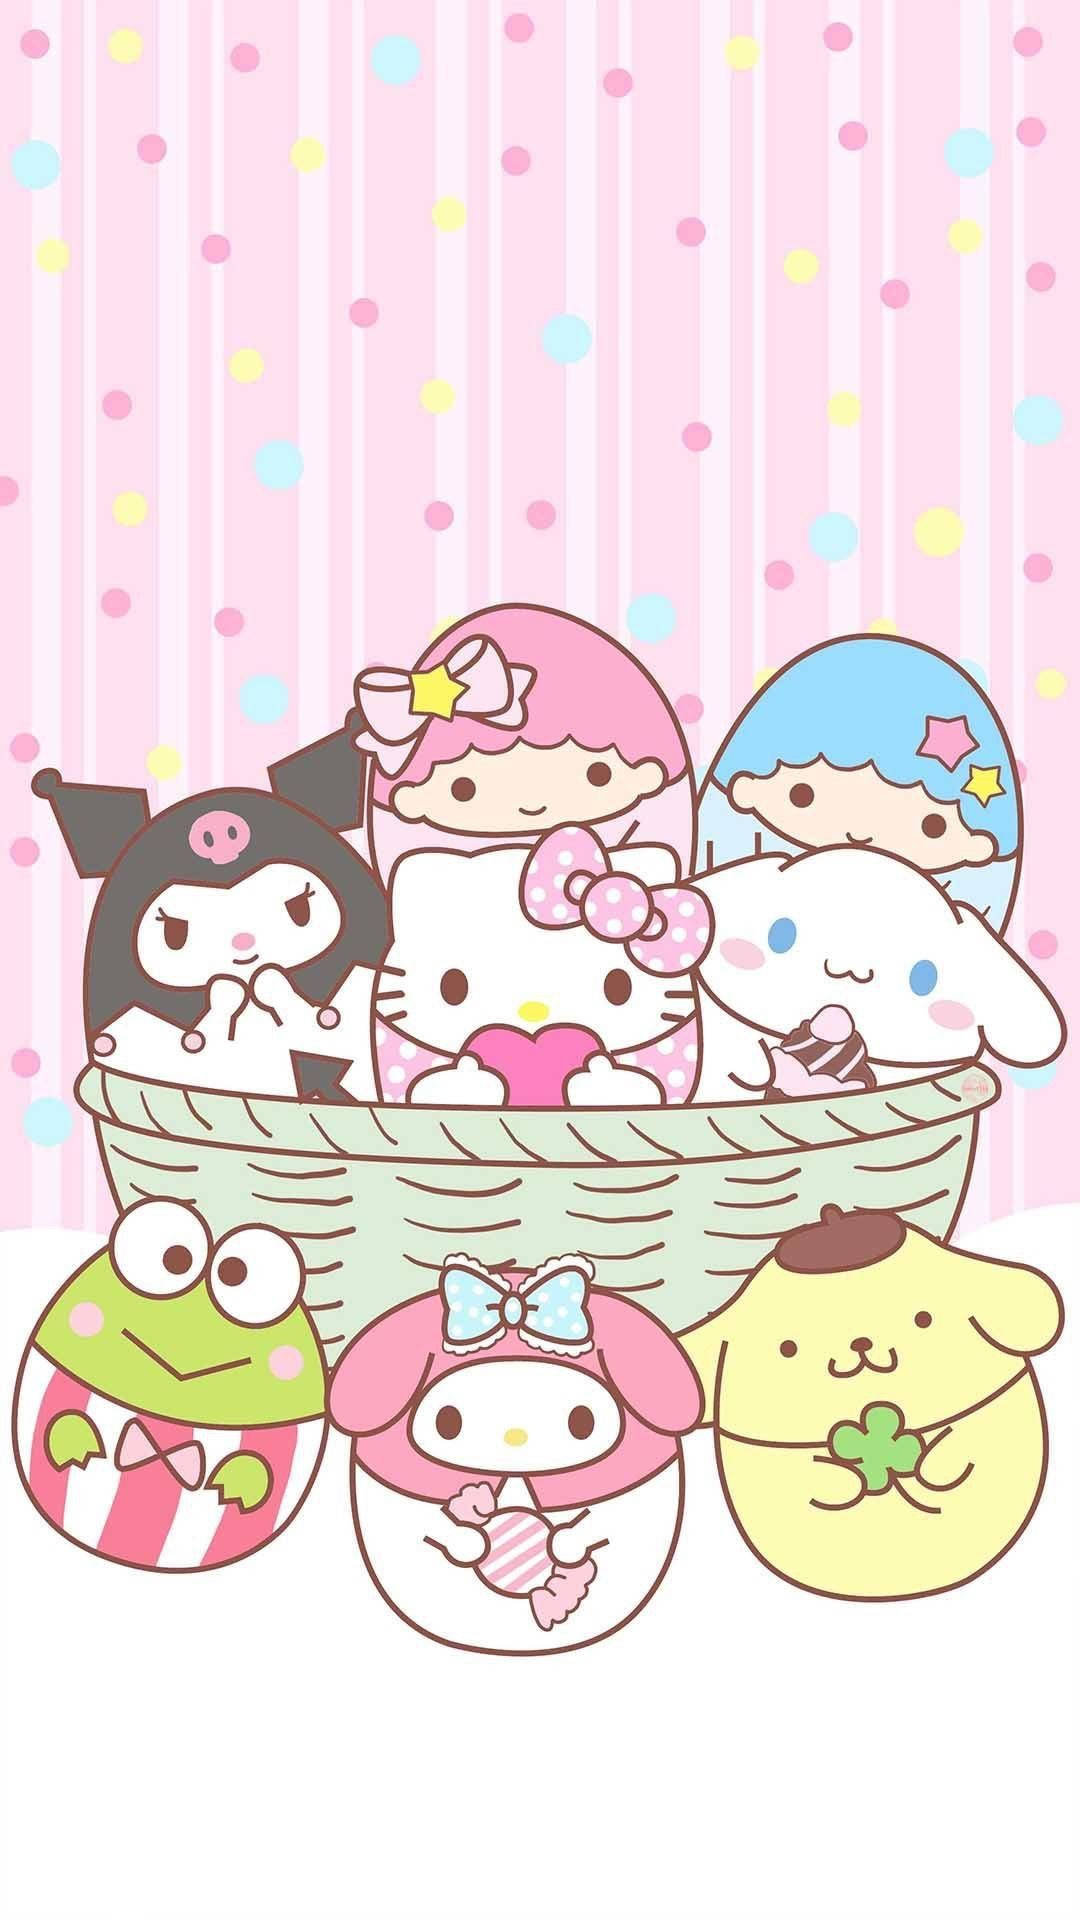 Sanrio Characters In A Basket